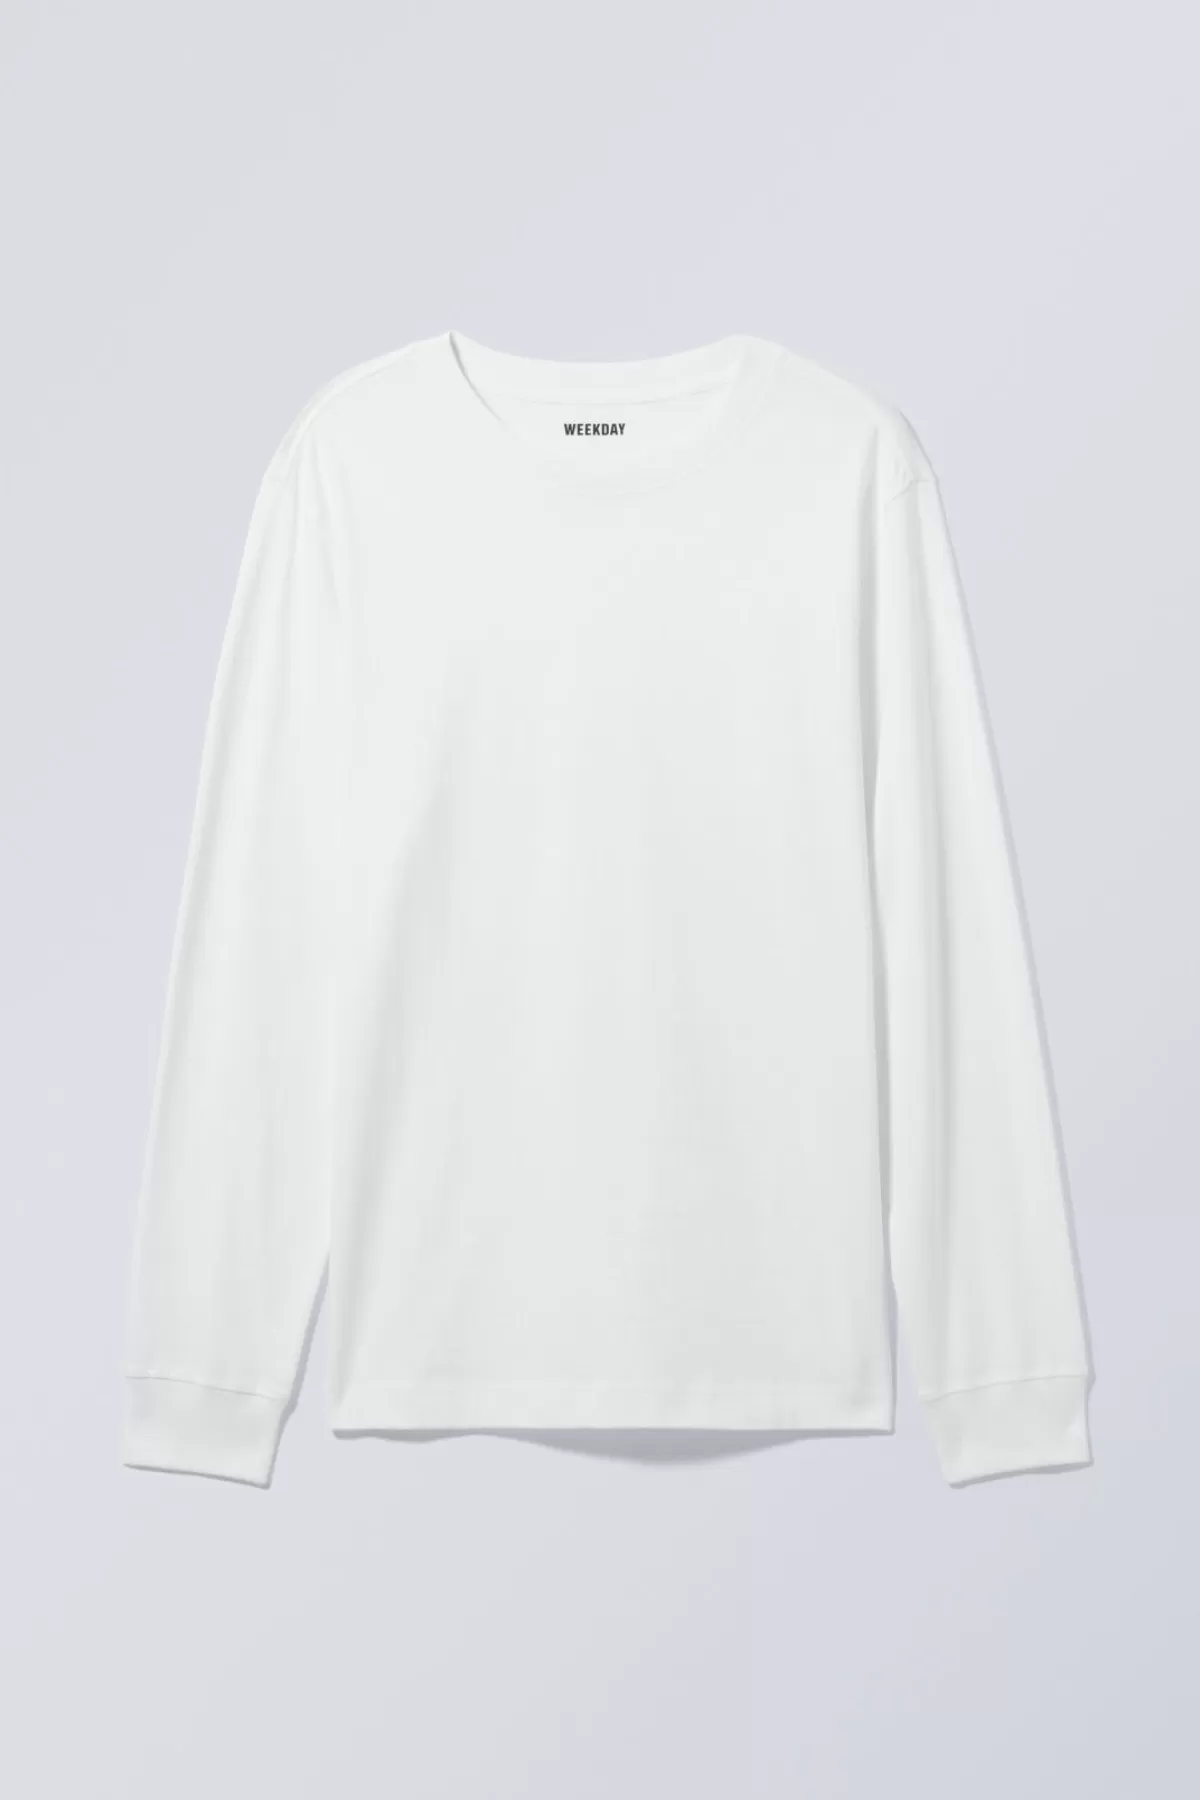 Weekday Relaxed Midweight Long Sleeve White Hot